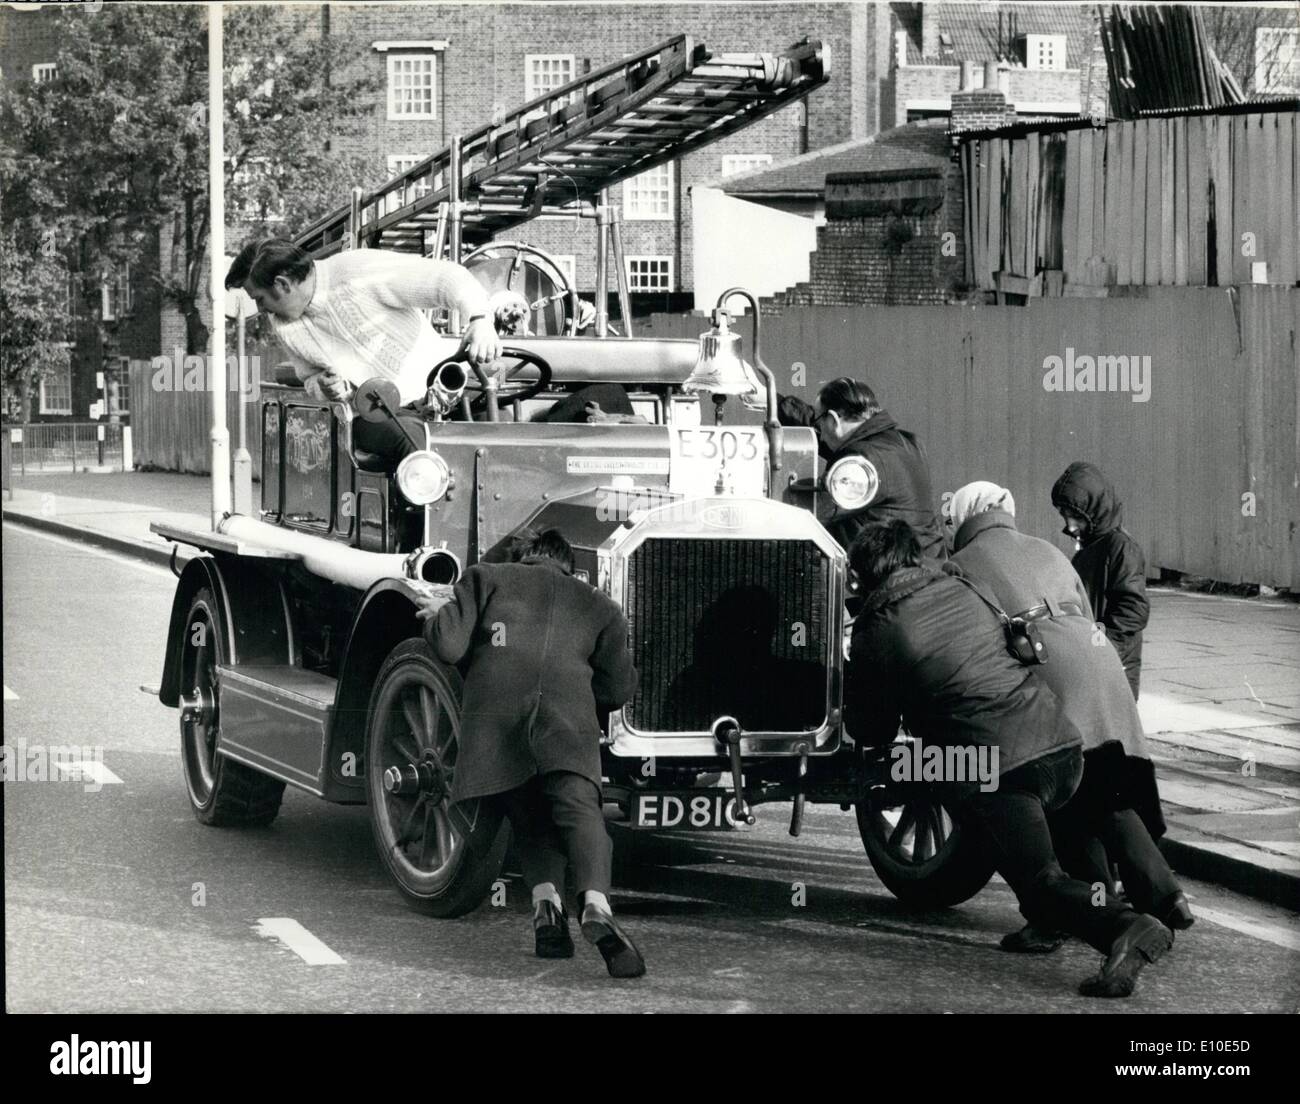 May 05, 1972 - Historic commercial vehicle club run from London to Brighton : About 180 vehicles took part in this year's historic commercial vehicle club run from battersea park, London , to Brighton. Among the vehicles taking part were vintage fire engines, vans, trucks, buses, coaches and a steam tractor. photo shows An early casualty during the run to Brighton today was this Dennis N-Type fire engine, built in 1914. Members of the public give the vehicle a push to get started again in Streatham. Stock Photo